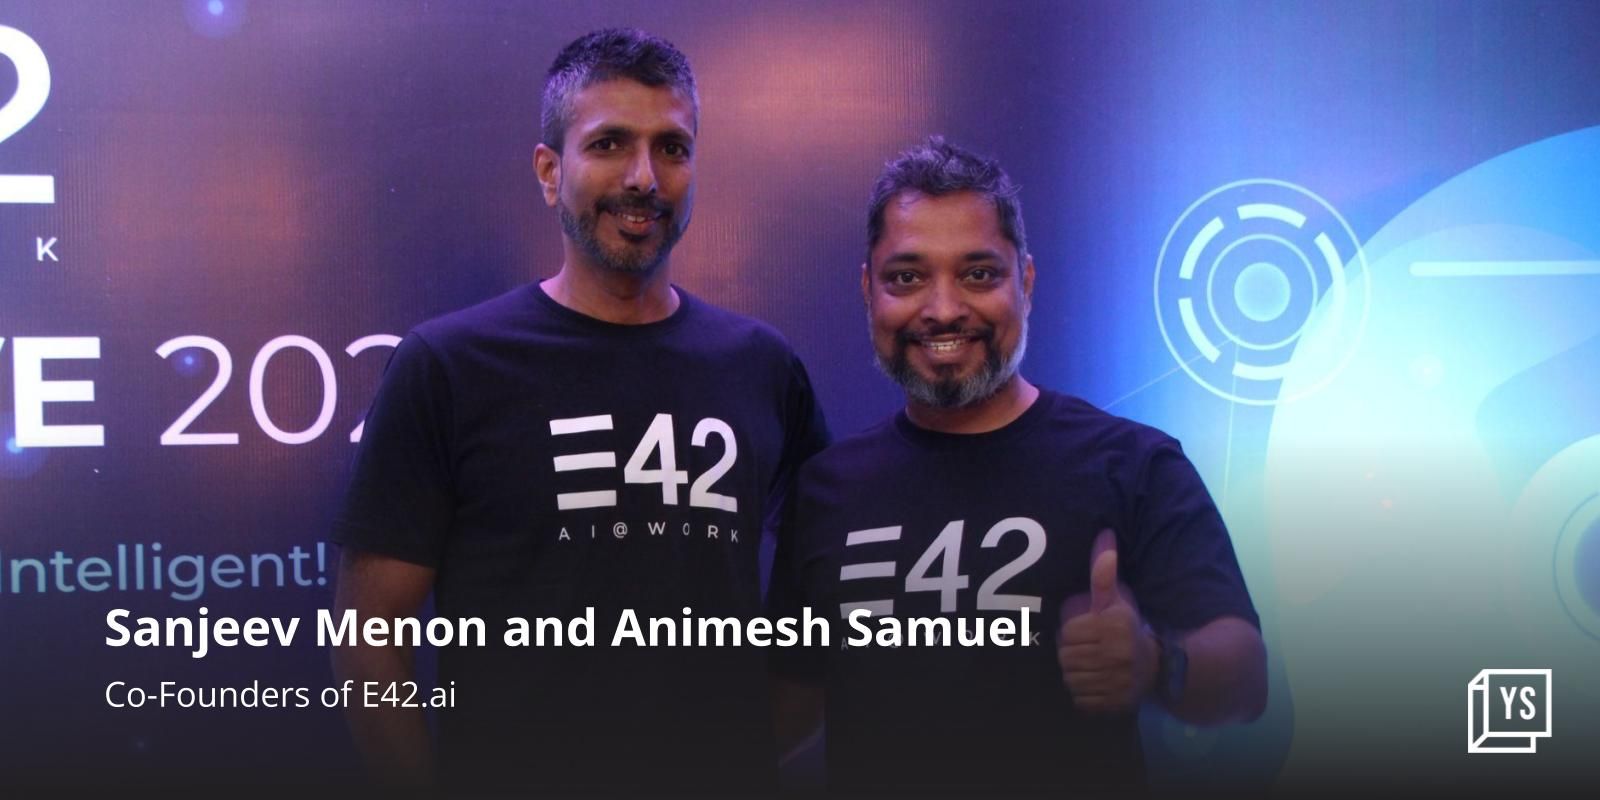 With AI co-workers, PaaS firm E42.ai is making enterprises intelligent